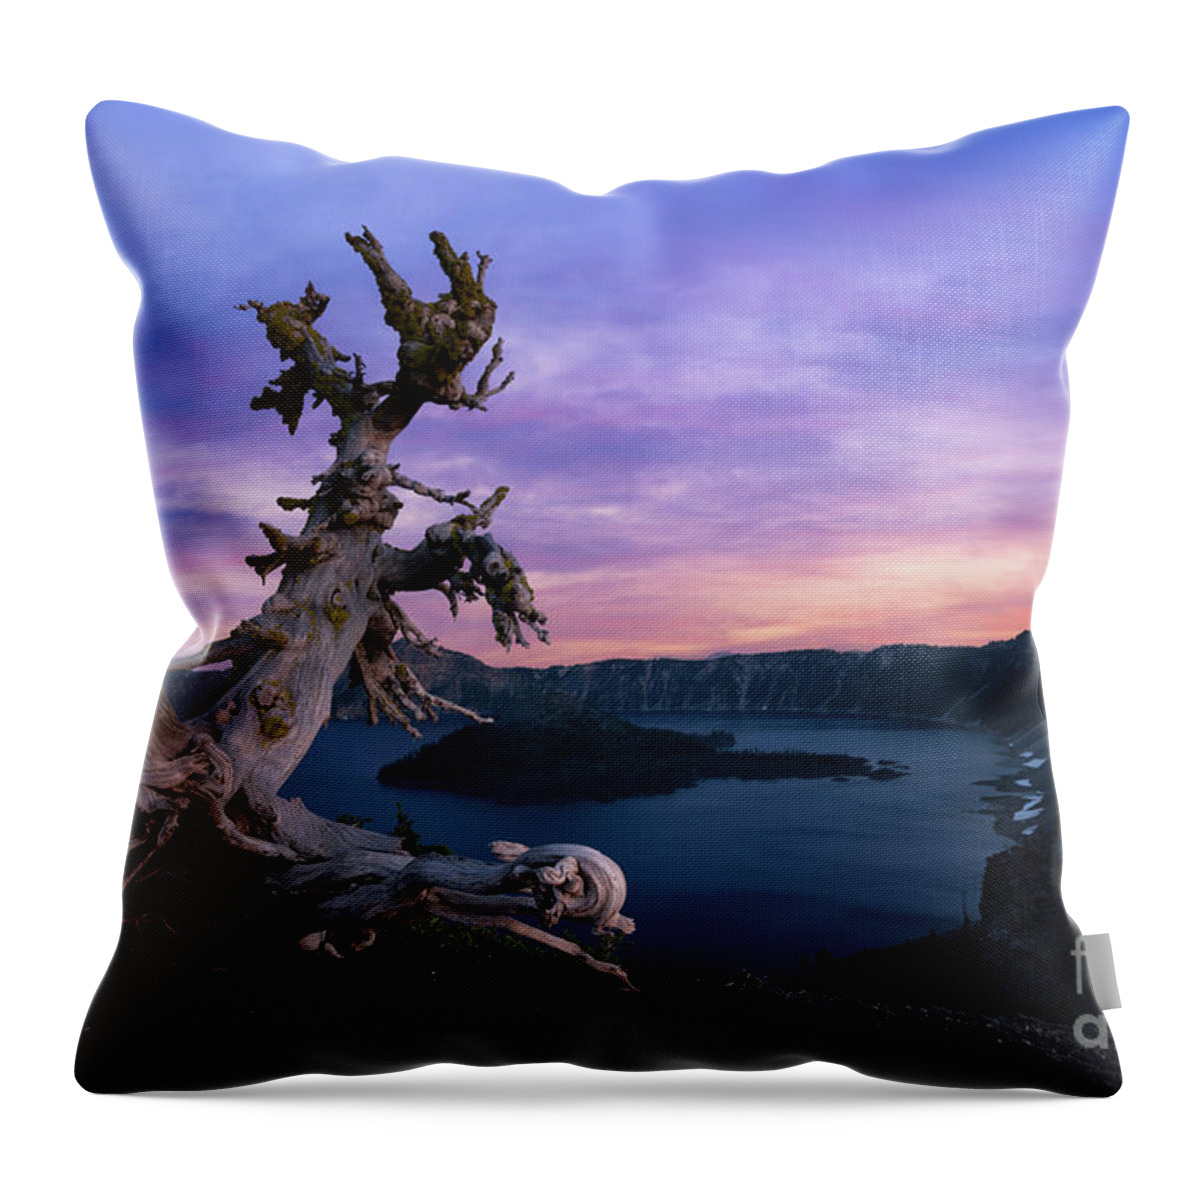 Crater Lake Throw Pillow featuring the photograph Ancient Whitebark Pine by Michael Ver Sprill